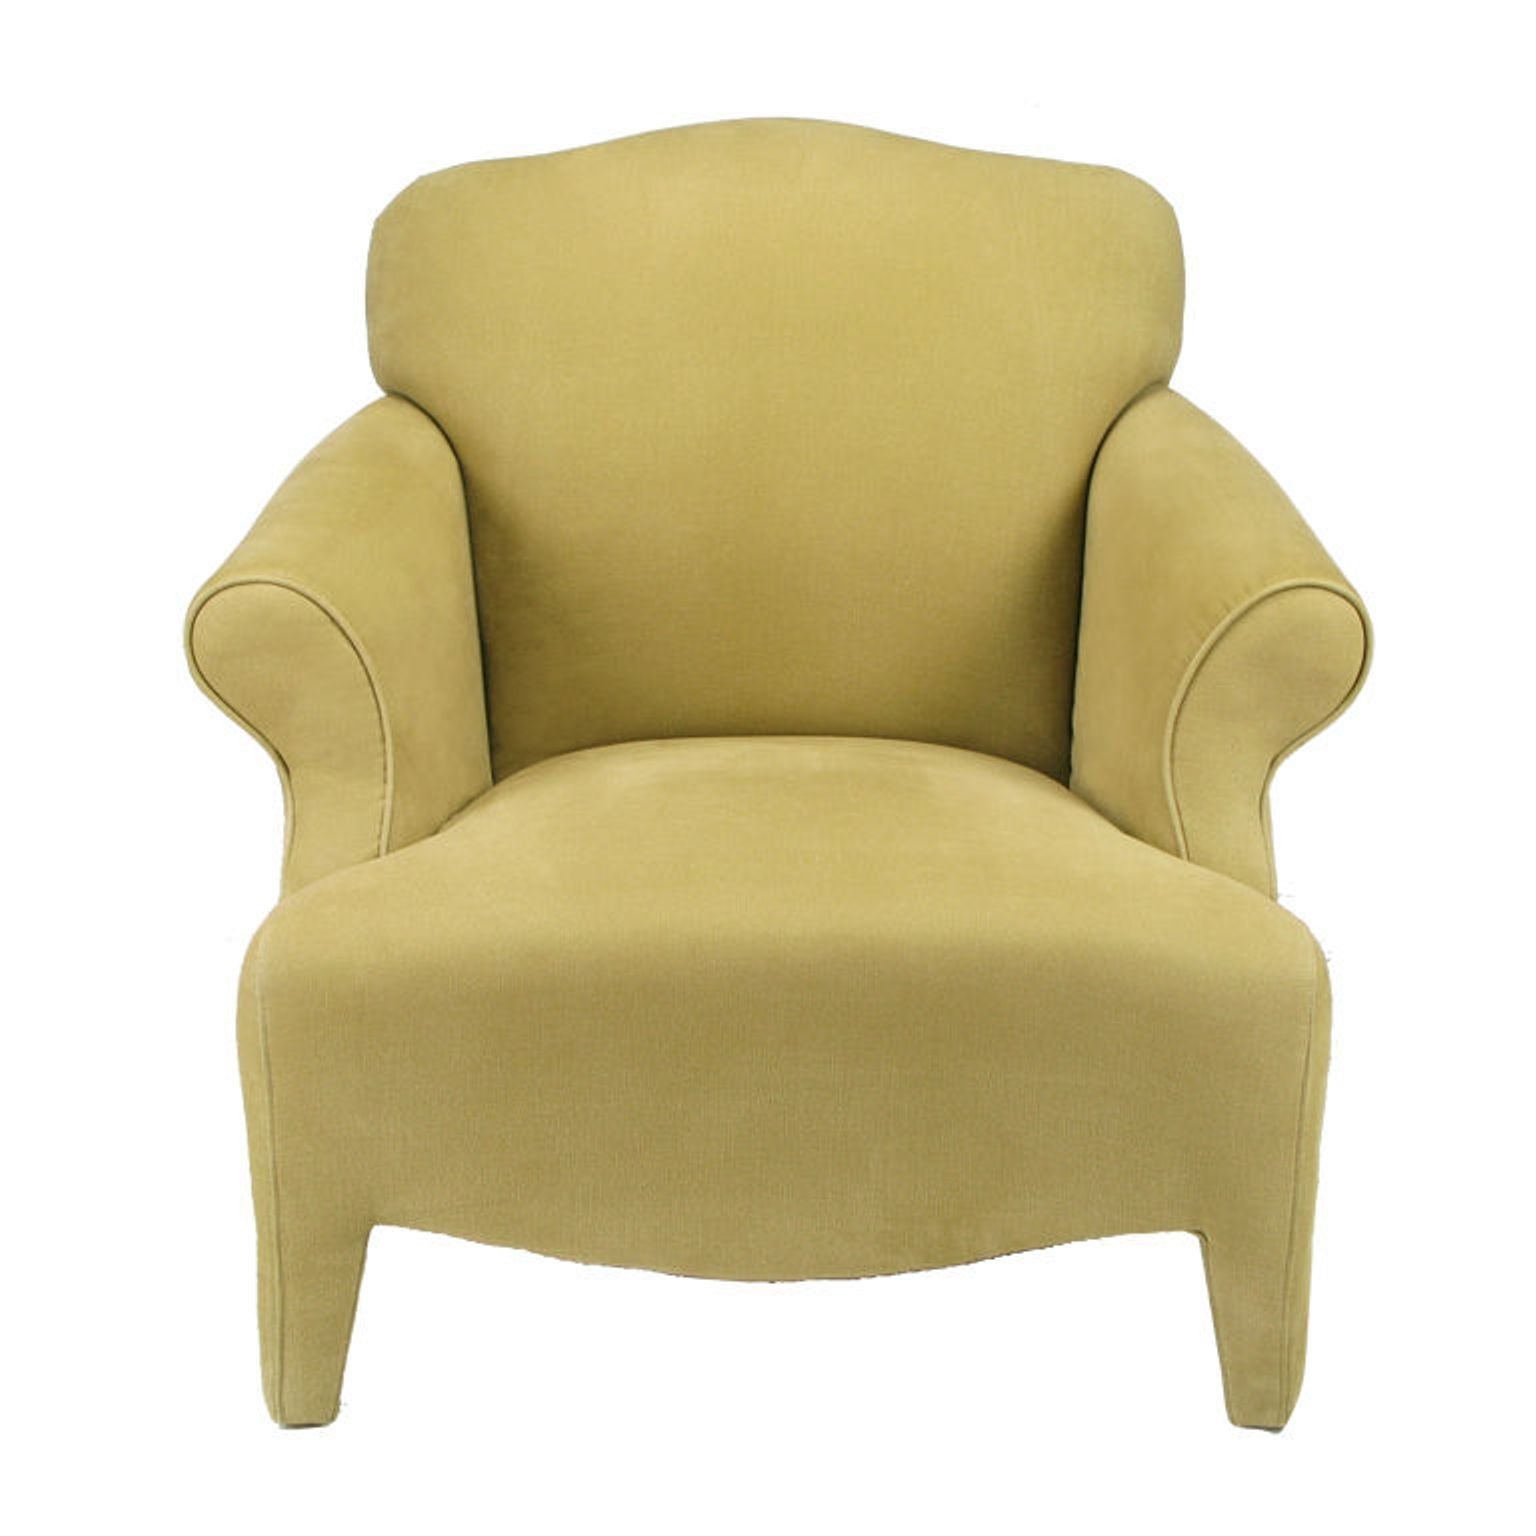 Neotraditional Fully Upholstered Camel Ultra Suede Lounge Chair For Sale